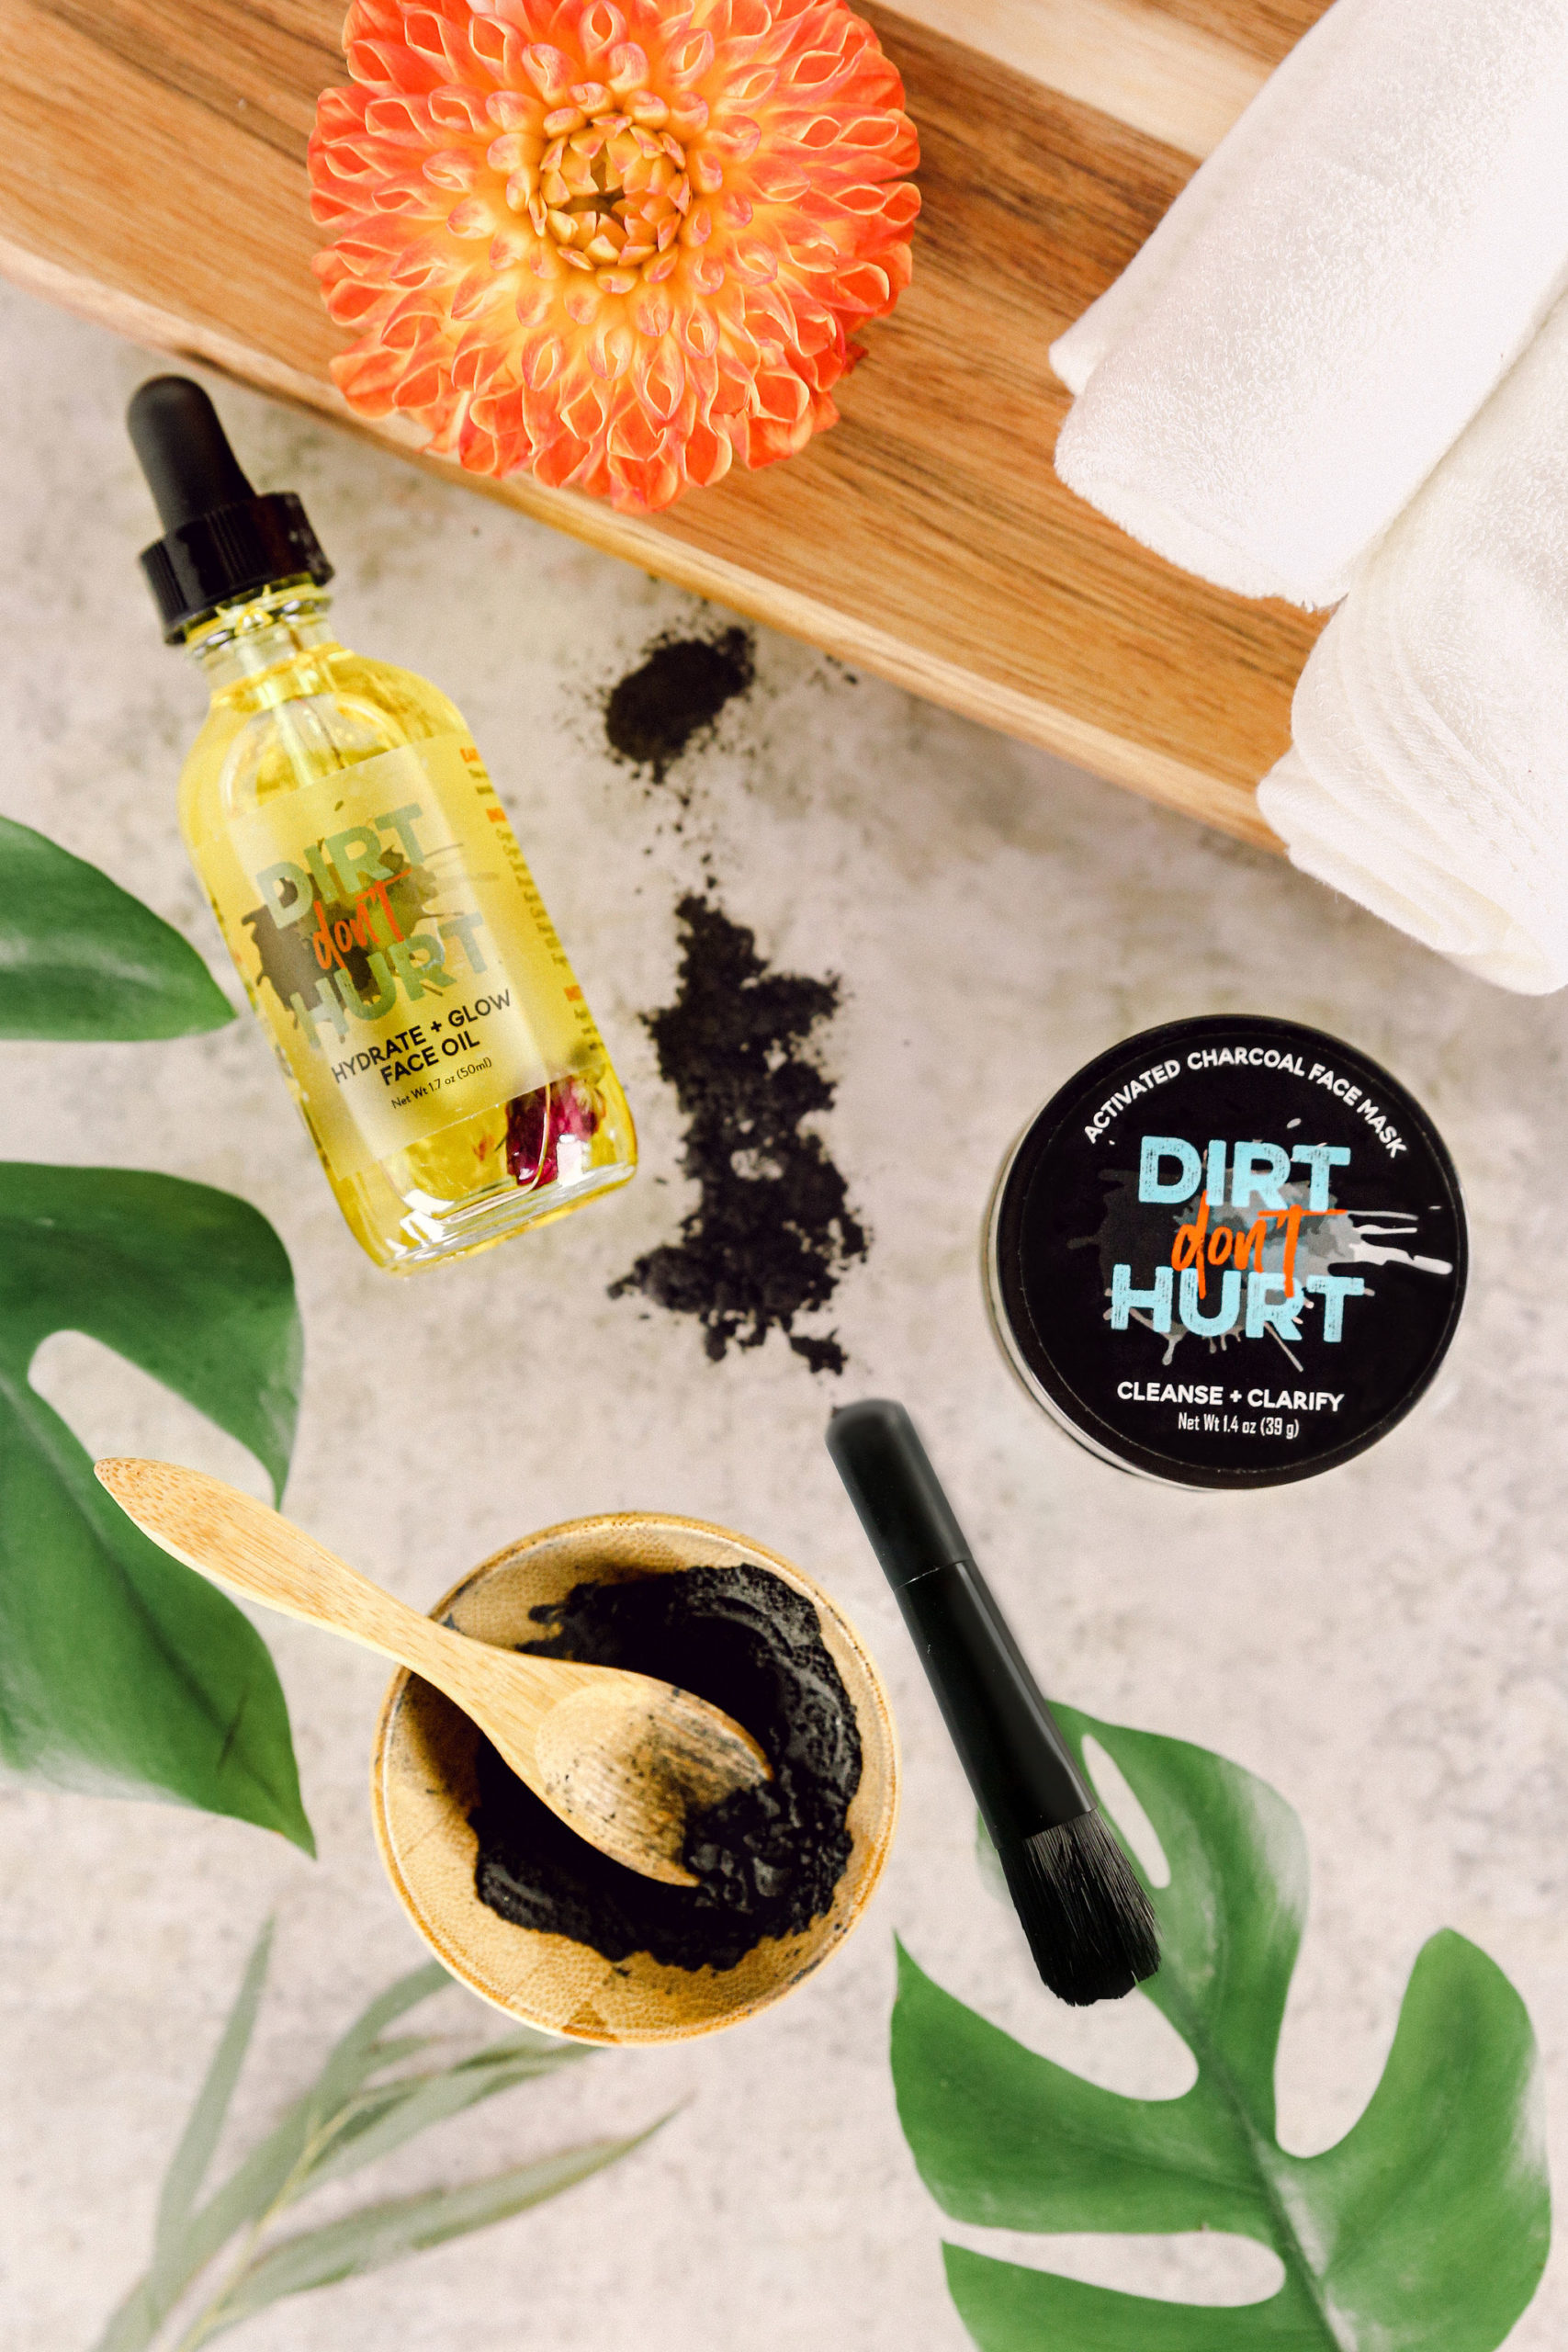 Styled product photography flat lay Amazon lifestyle tropical funky vegan natural black owned skincare